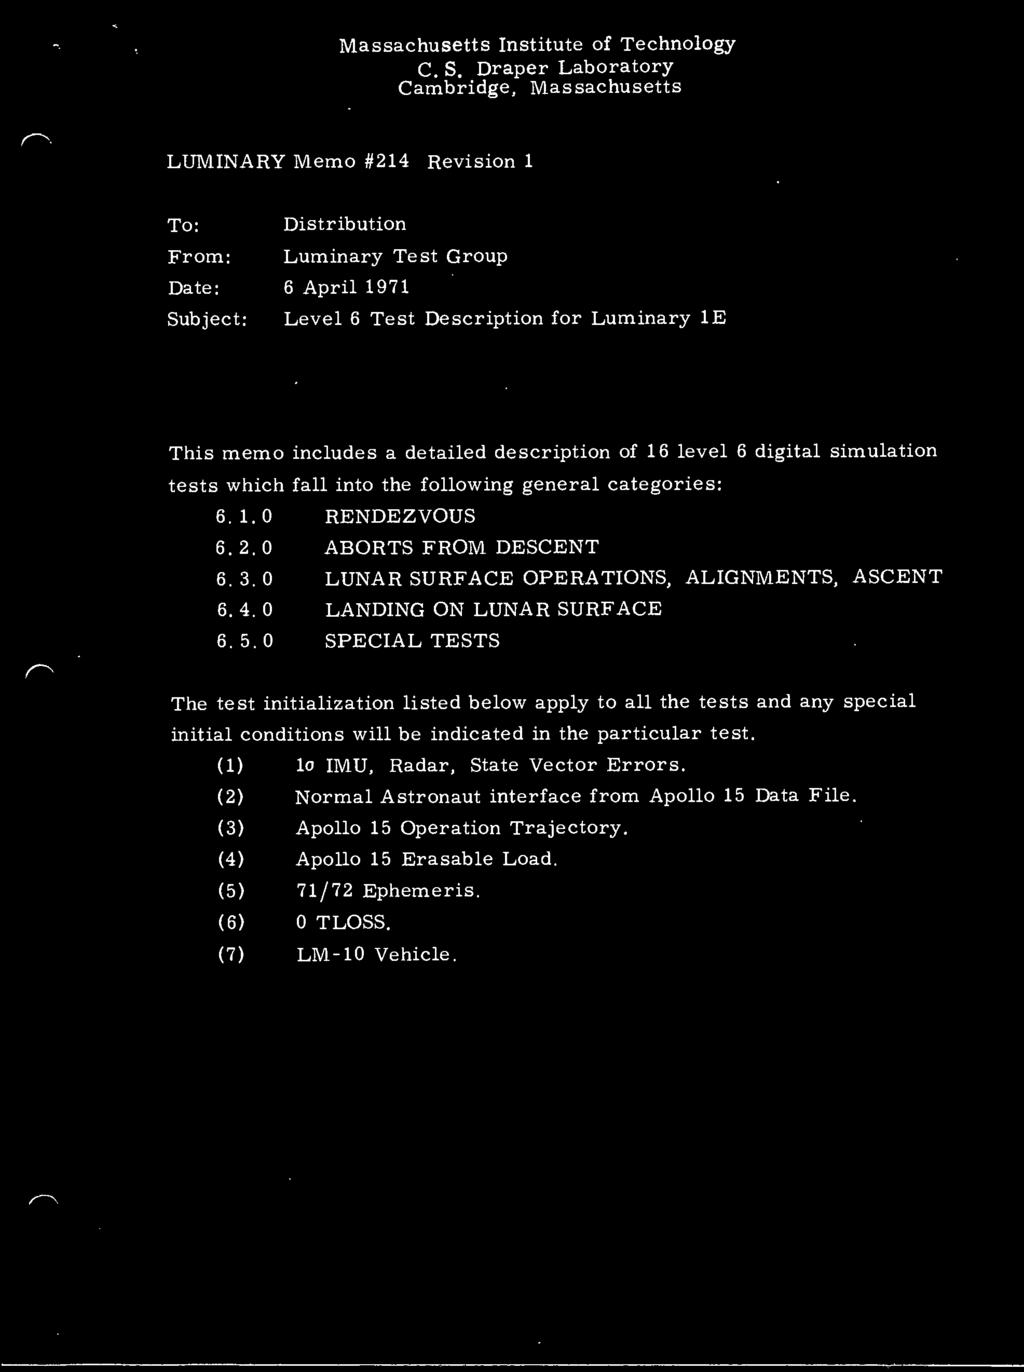 description of 16 level 6 digital simulation tests which fall into the following general categories: 6.1.0 RENDEZVOUS 6.2.0 ABORTS FROM DESCENT 6.3.0 LUNAR SURFACE OPERATIONS, ALIGNMENTS, ASCENT 6. 4.